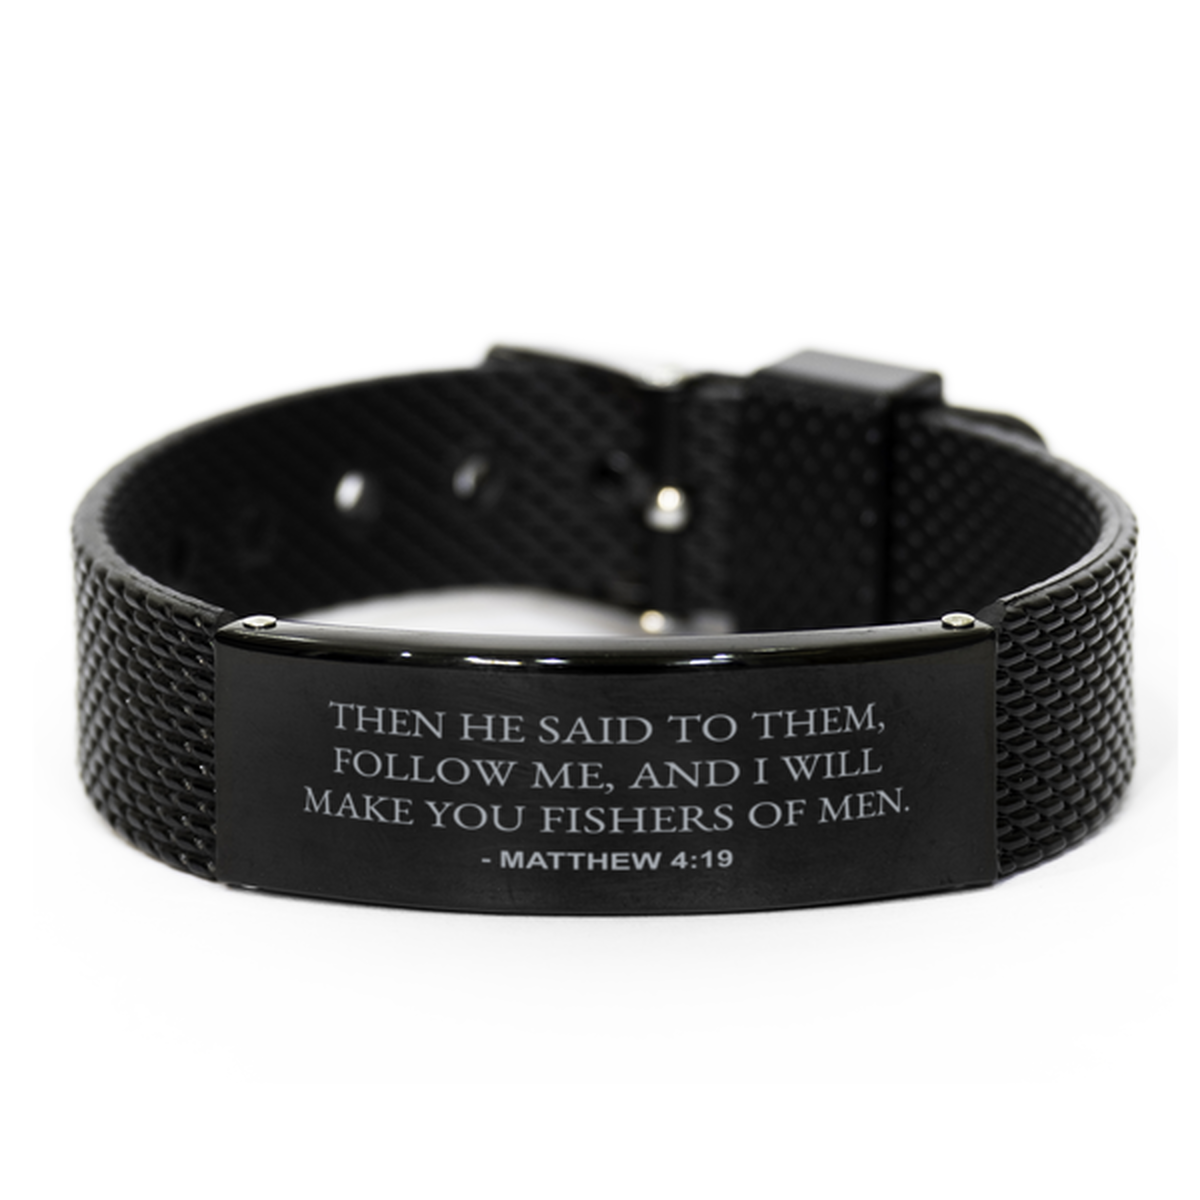 Christian Black Bracelet,, Matthew 4:19 Then He Said To Them, Follow Me, And I Will Make, Motivational Bible Verse Gifts For Men Women